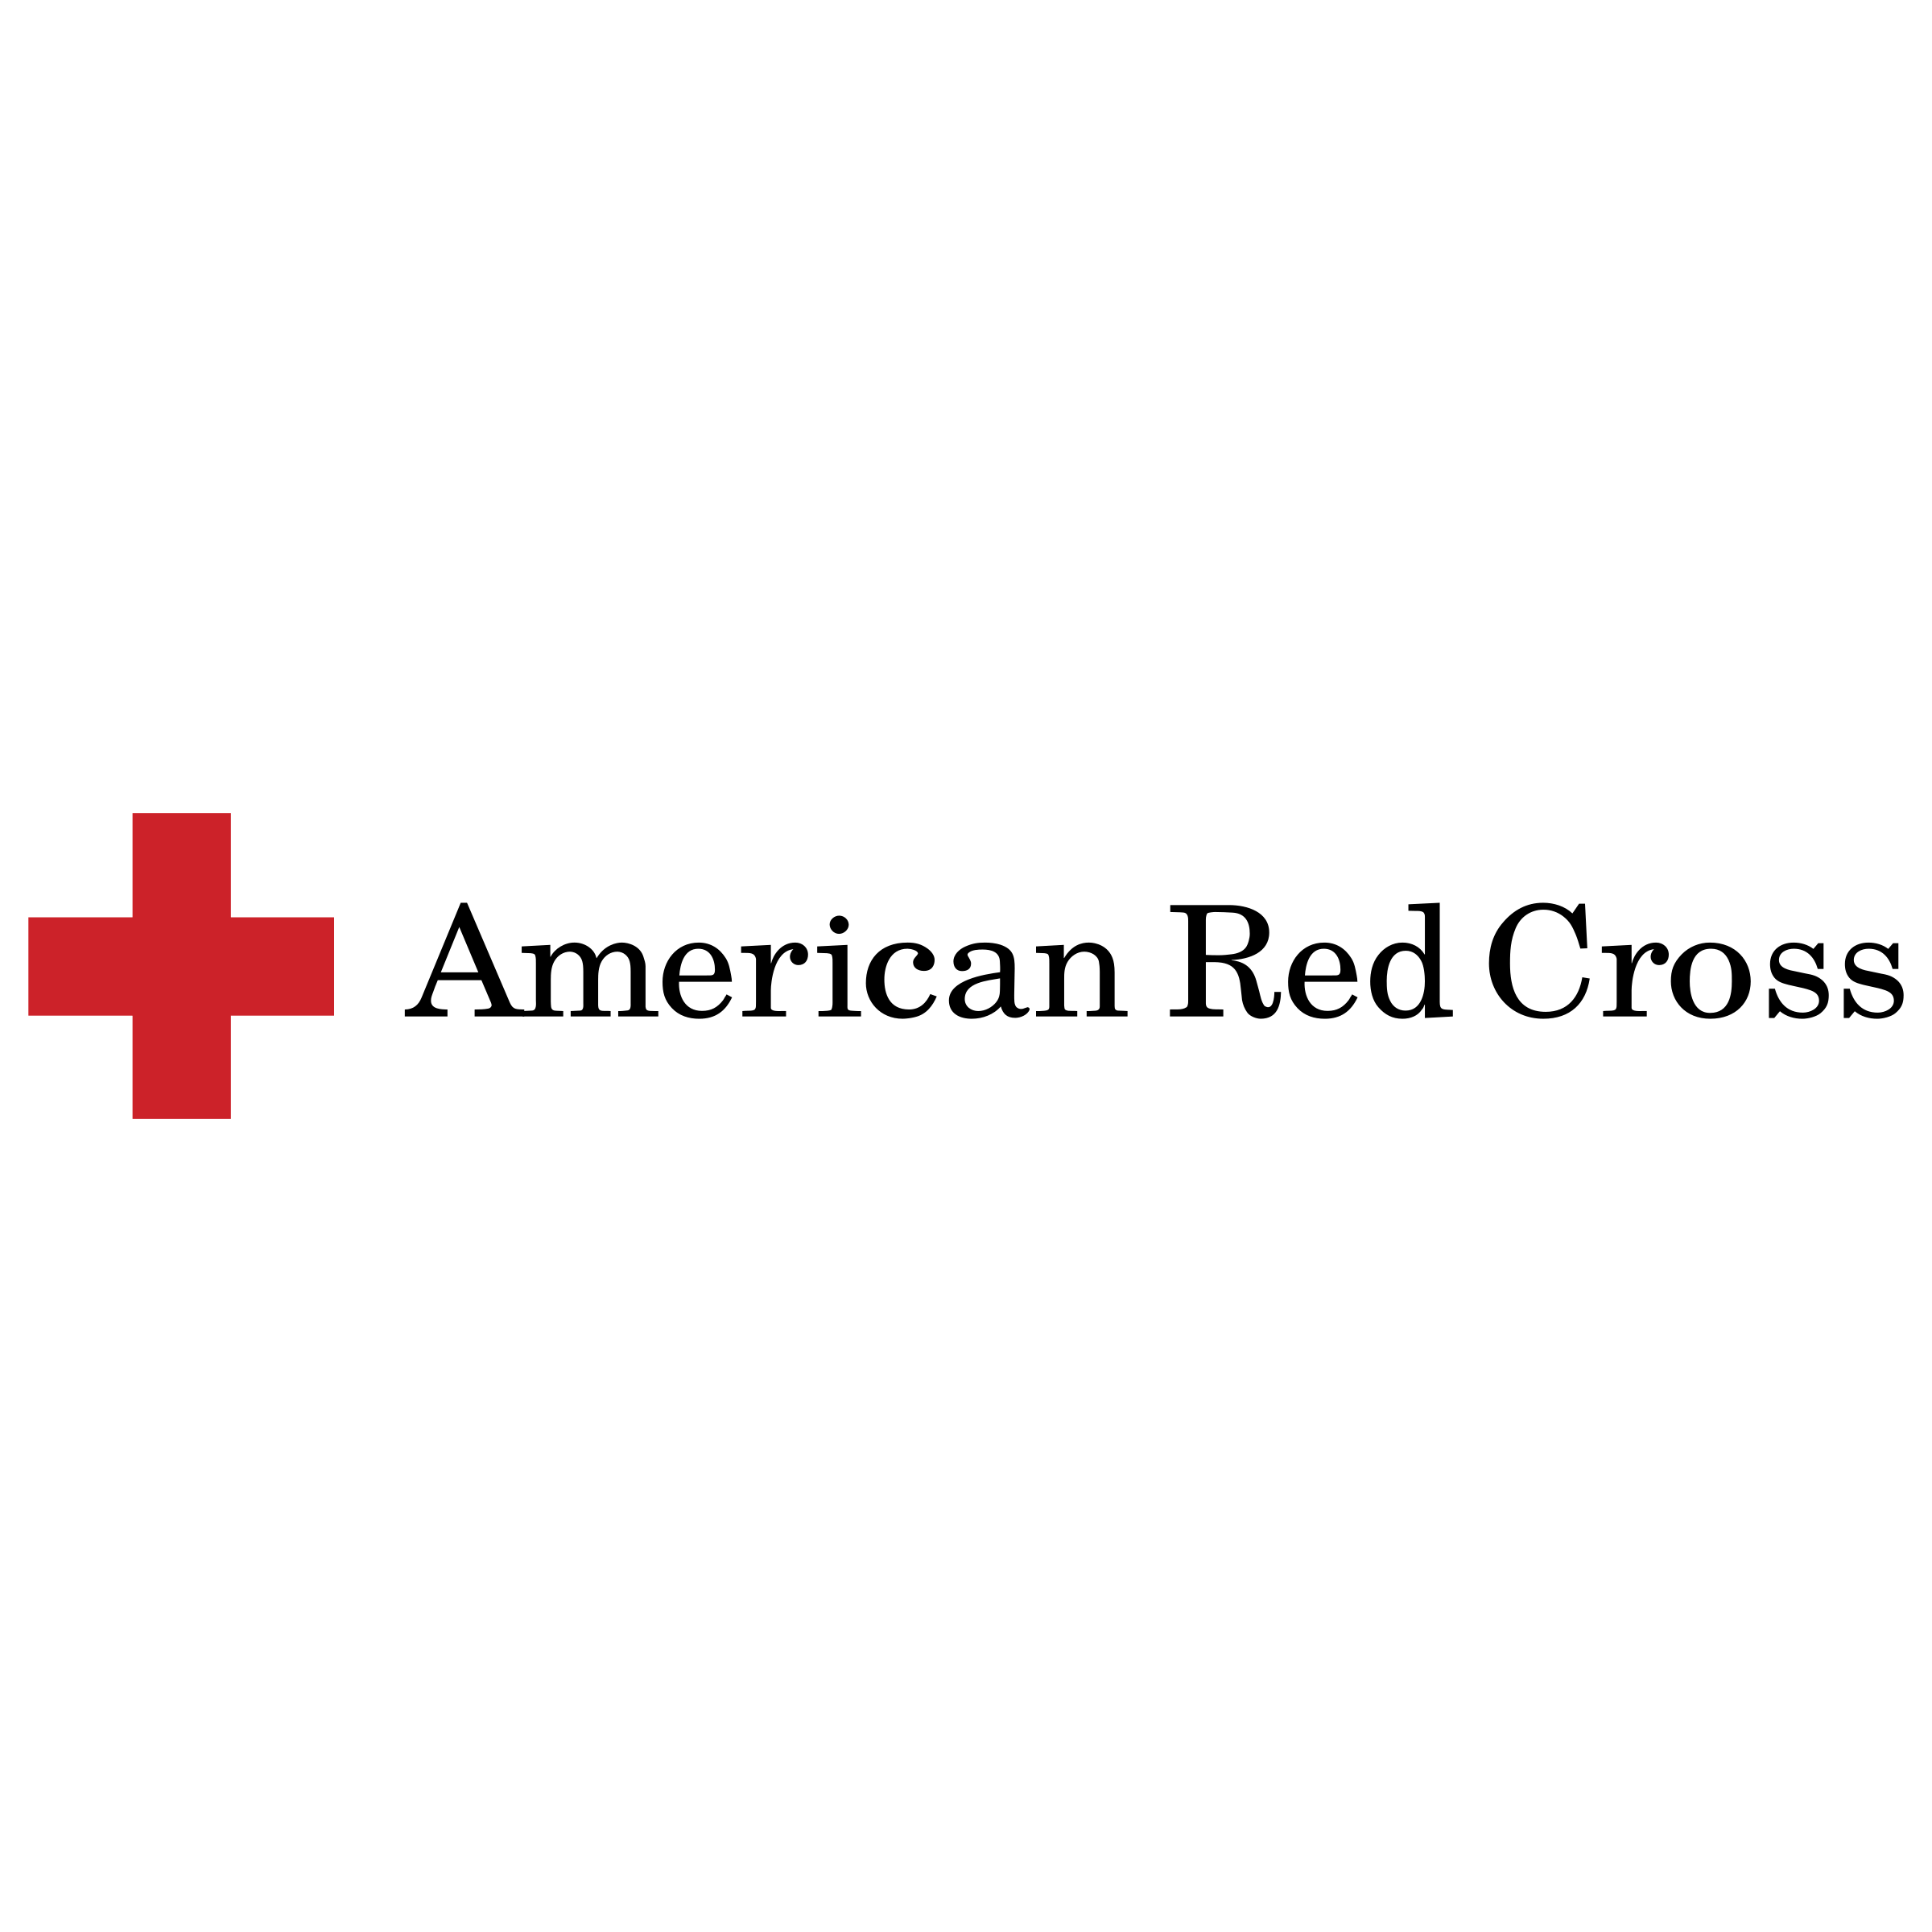 Amrican Red Cross Logo - American Red Cross Logo PNG Transparent & SVG Vector - Freebie Supply